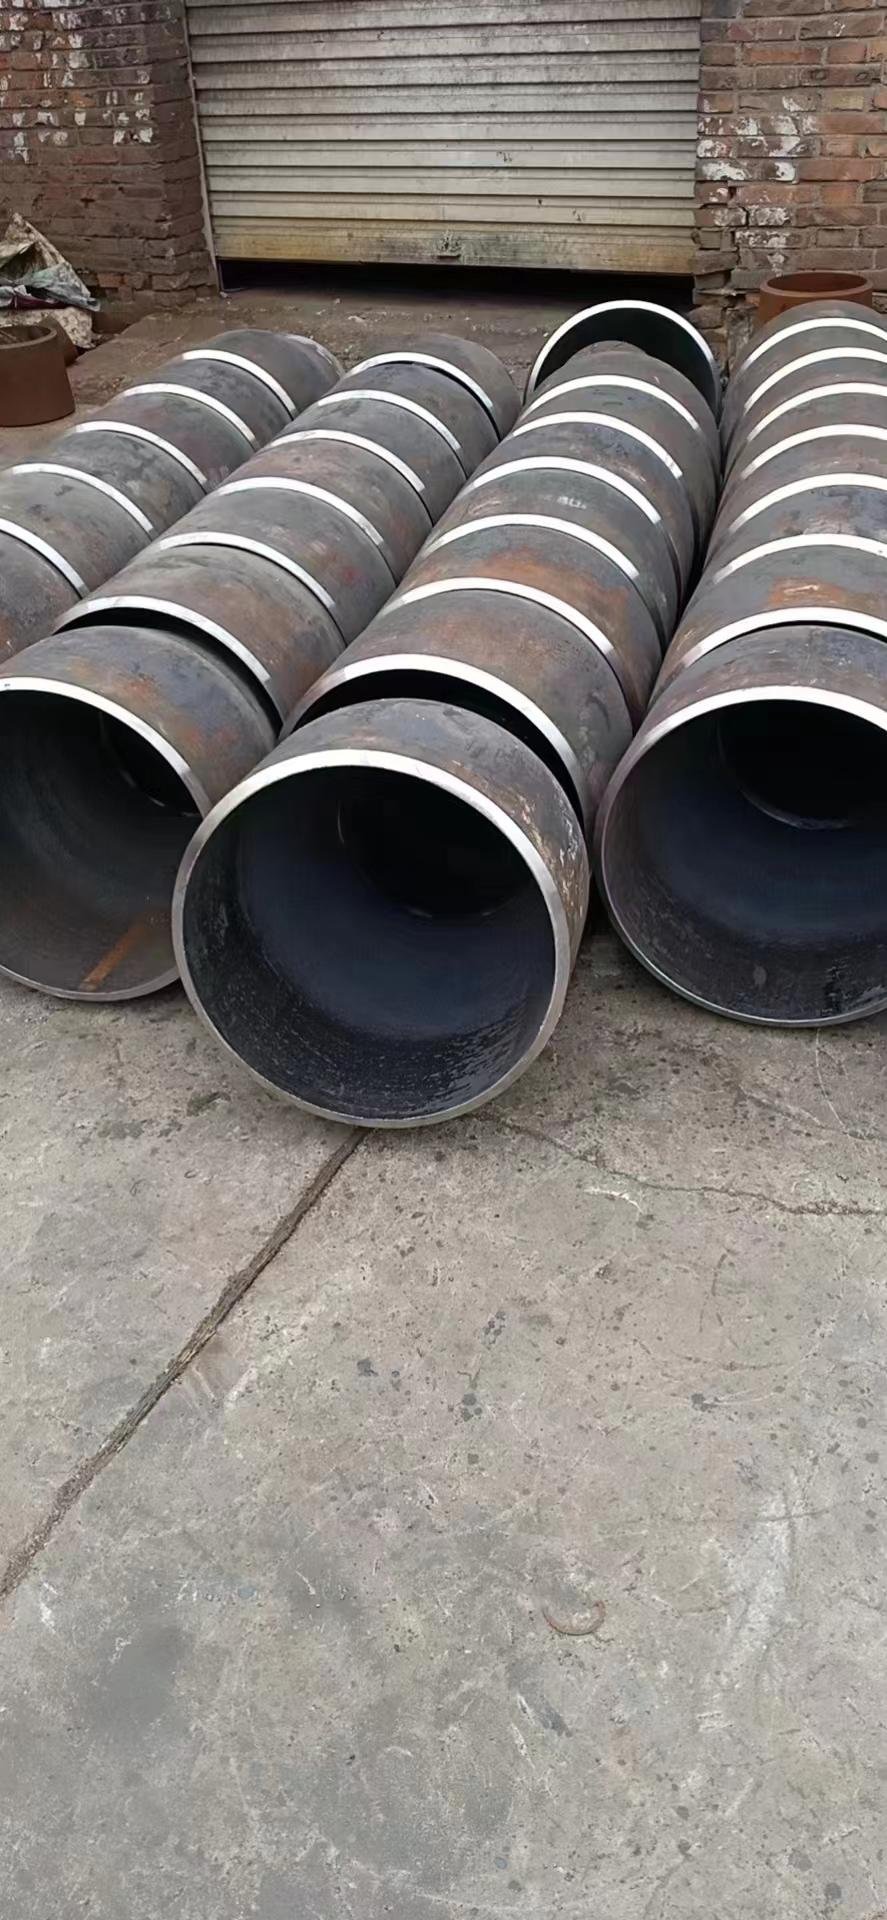 ASTM A234 WPB Seamless Carbon Steel Butt-Welding Pipe Fitting Concentric Reducer 2